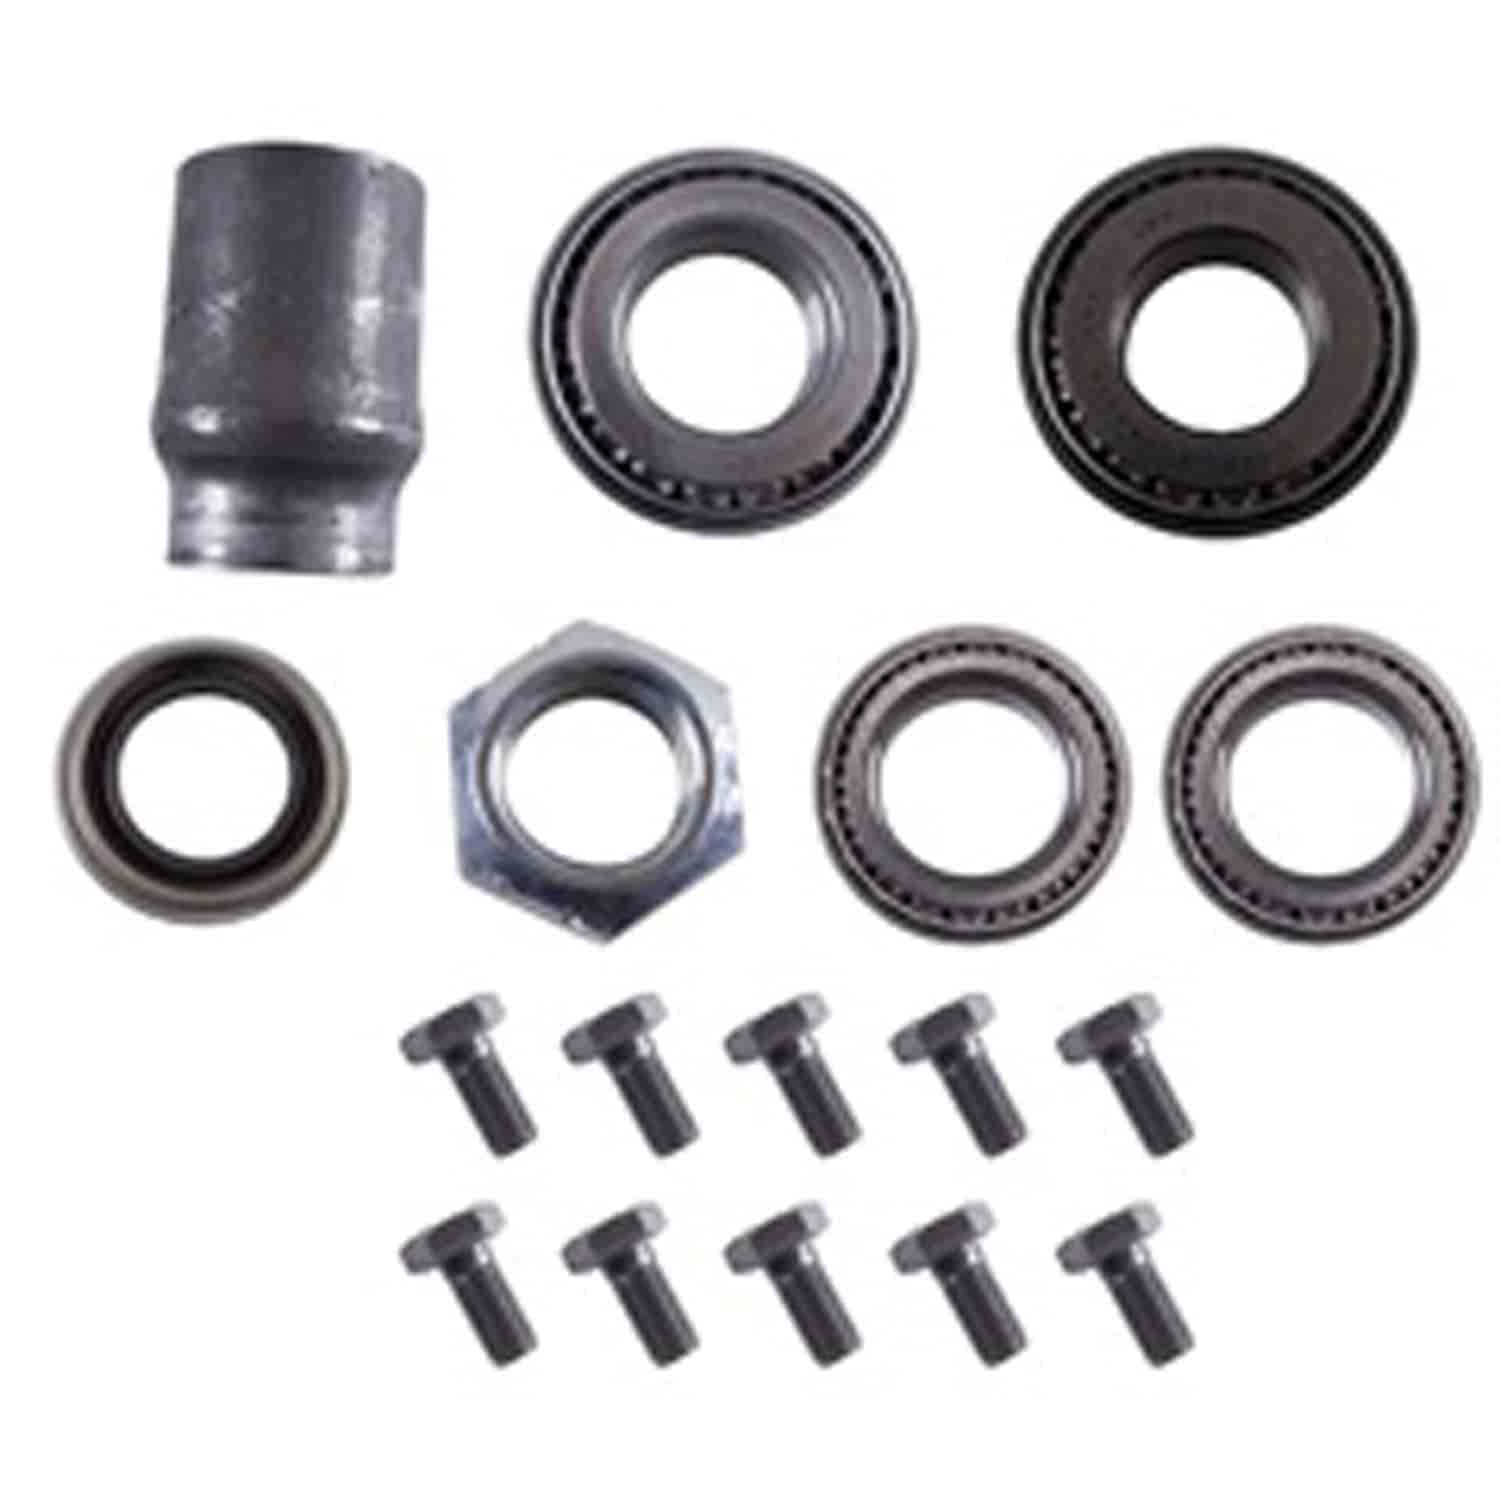 This differential rebuild kit from Omix-ADA fits 00-04 Jeep Grand Cherokee WJ with Dana 44 Rear After 3/29/00